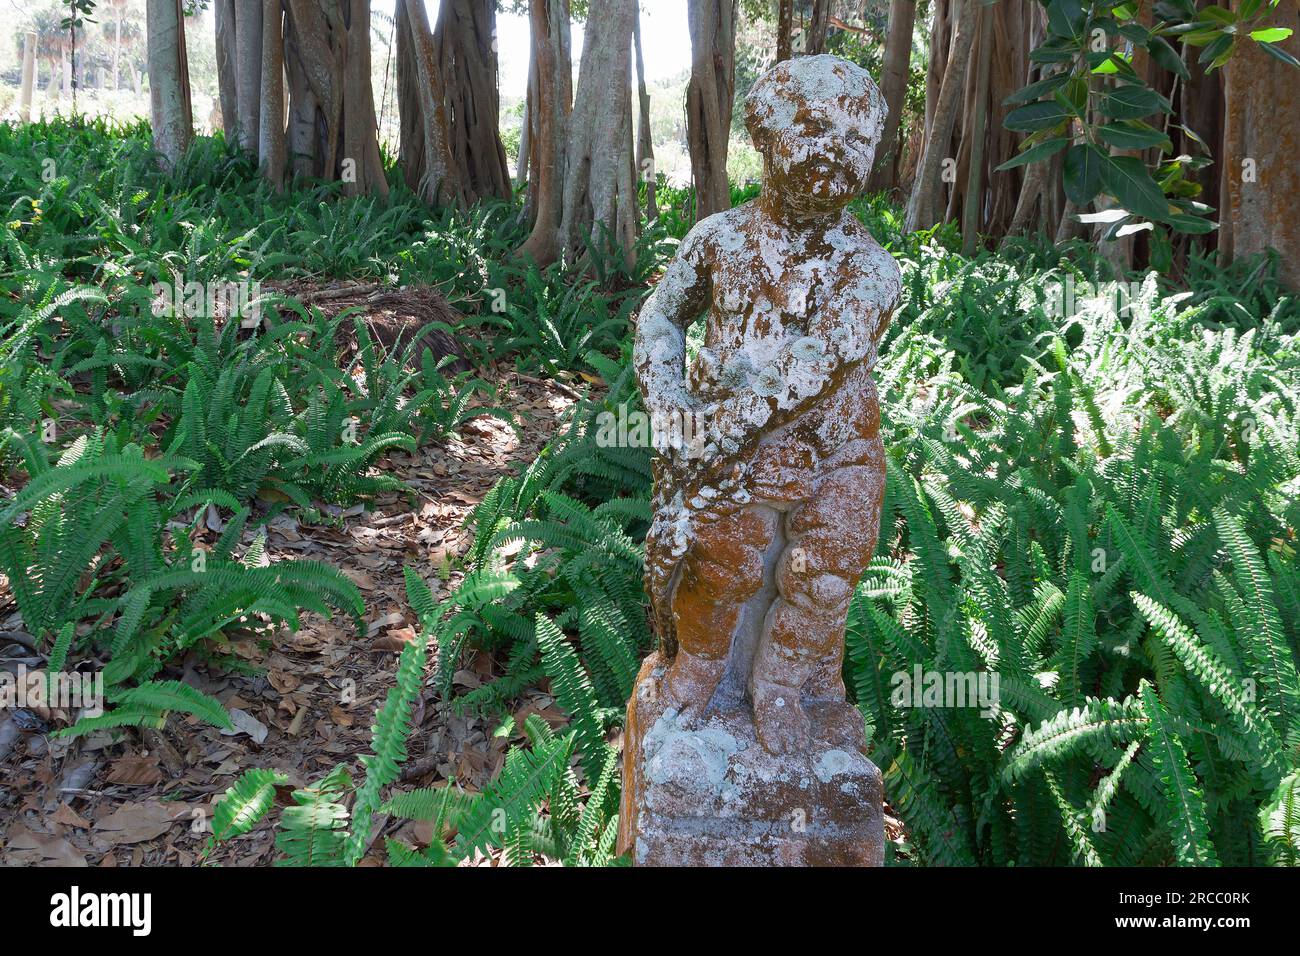 Erosion of a boy stone sculpture in the garden at John and Mable Ringling Museum, Sarasota, Florida. Stock Photo